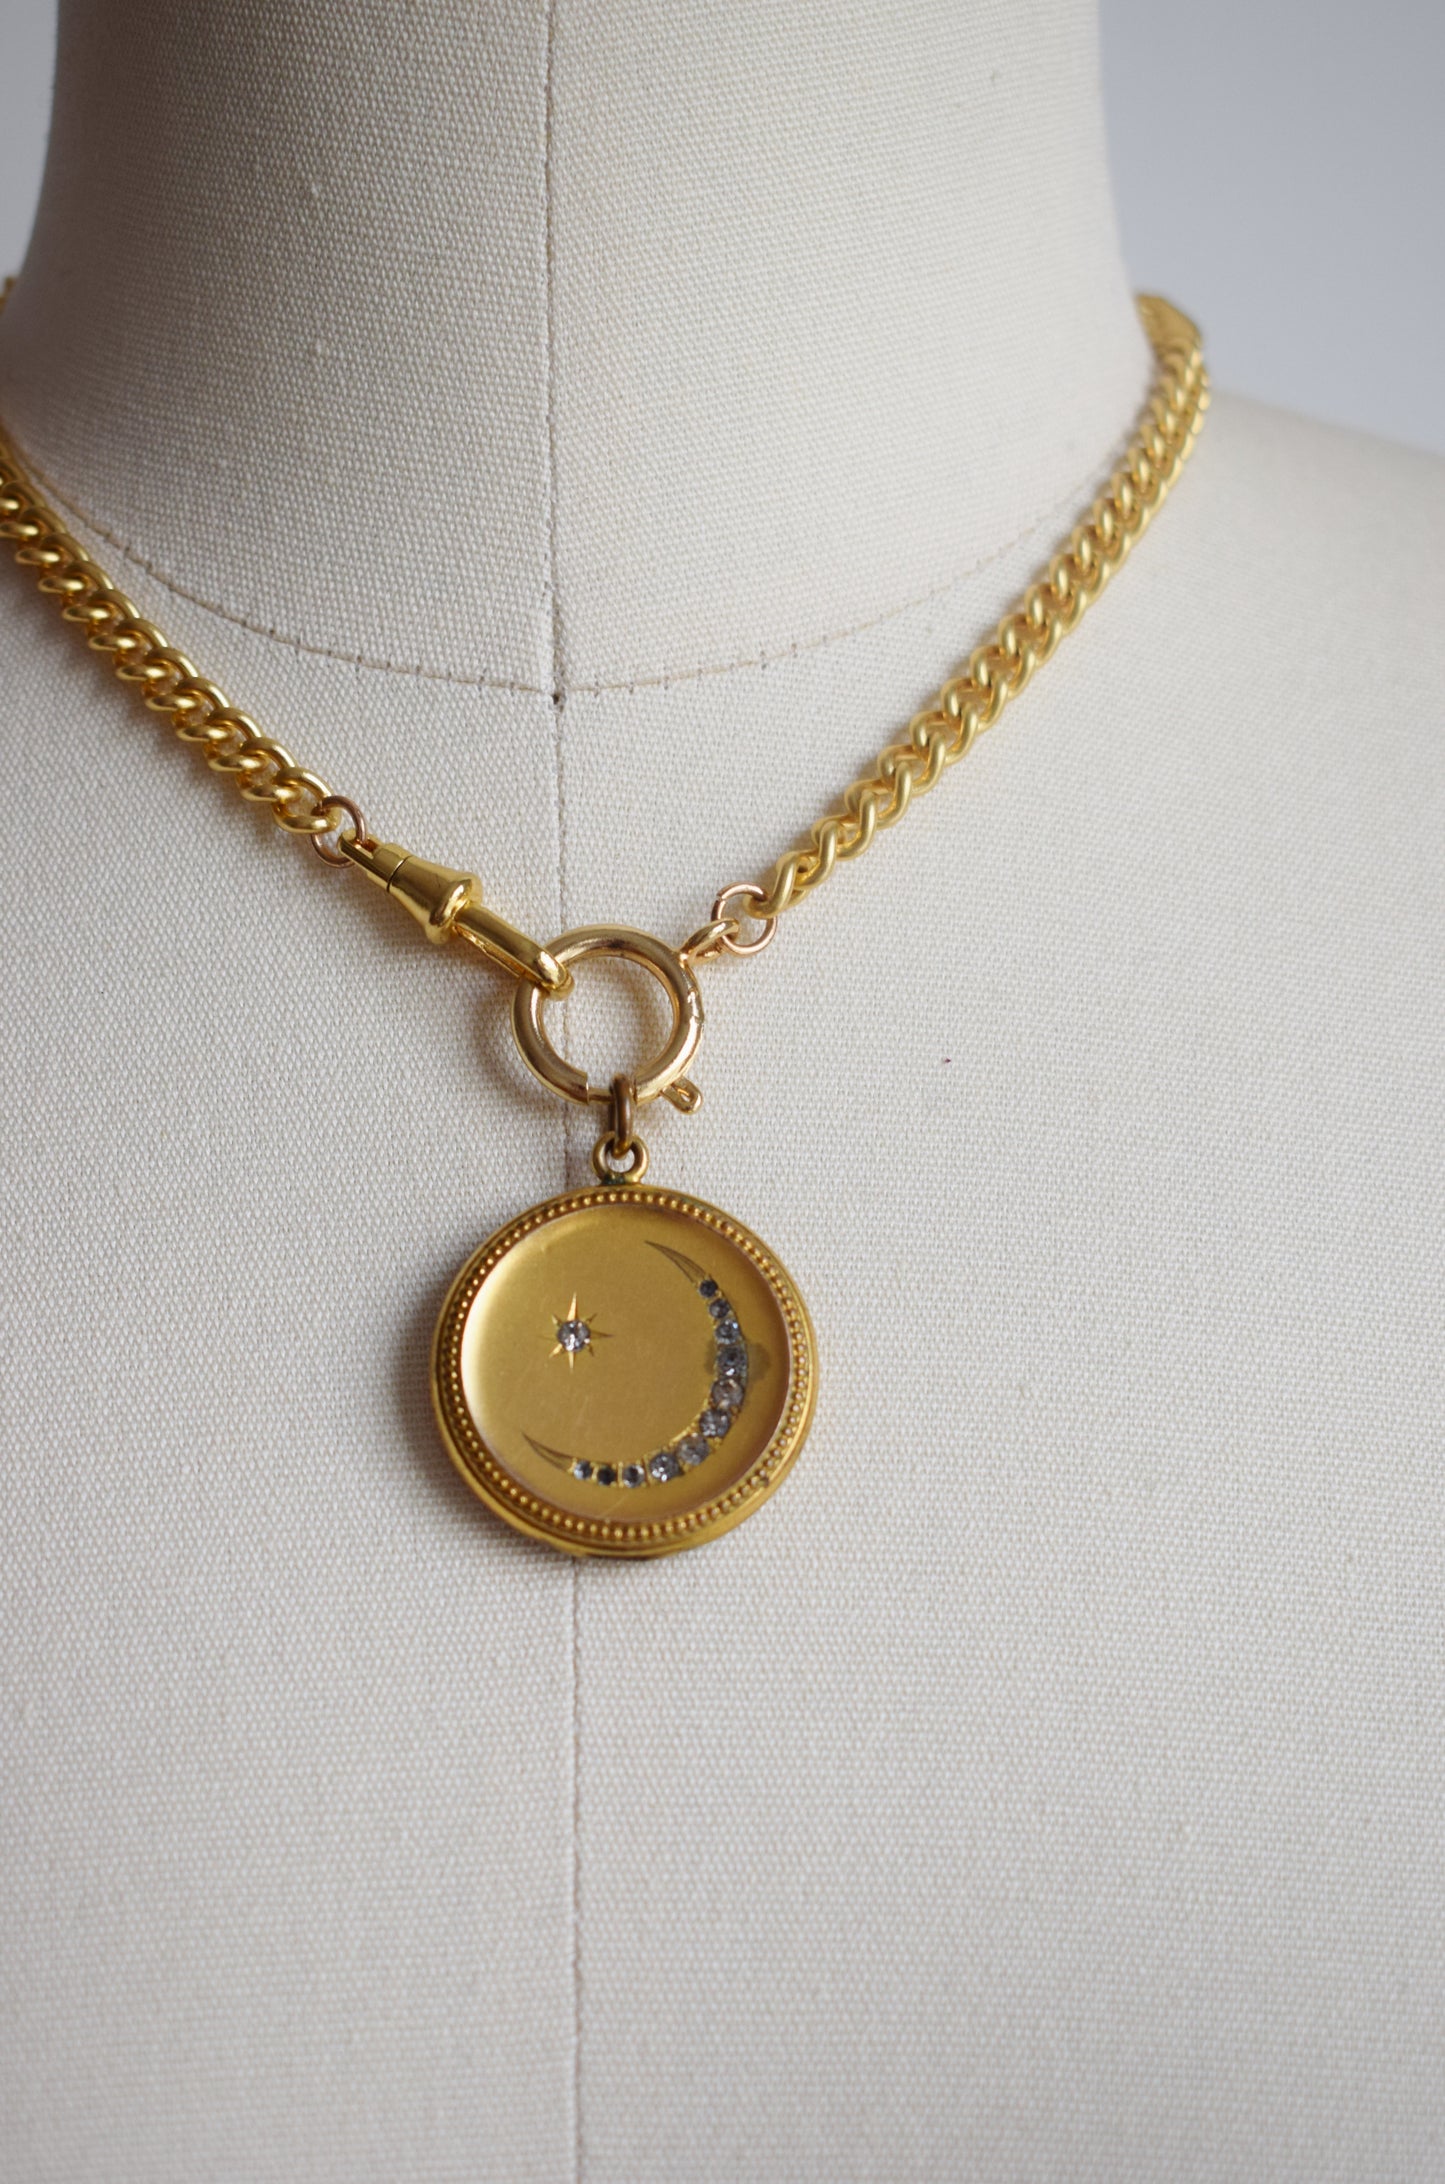 Antique Crescent Moon and Star Locket